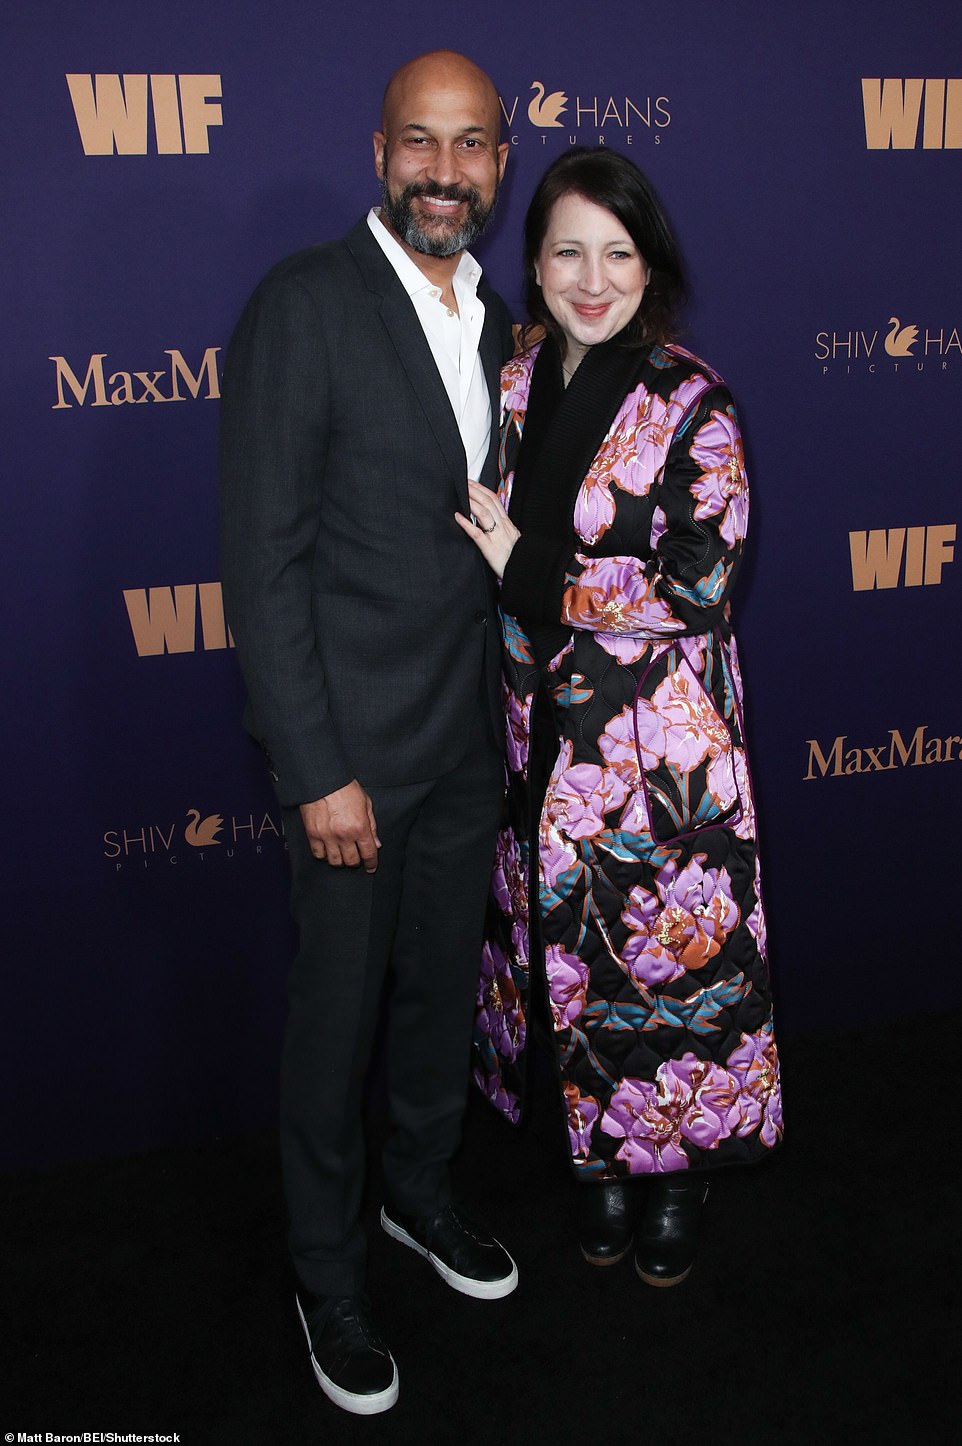 Keegan-Michael Key joined his wife Elle Key at the event in a dapper suit. He posed alongside the film producer, who wore a stunning quilted coat covered in purple flowers as her statement piece to go with her otherwise all-black ensemble